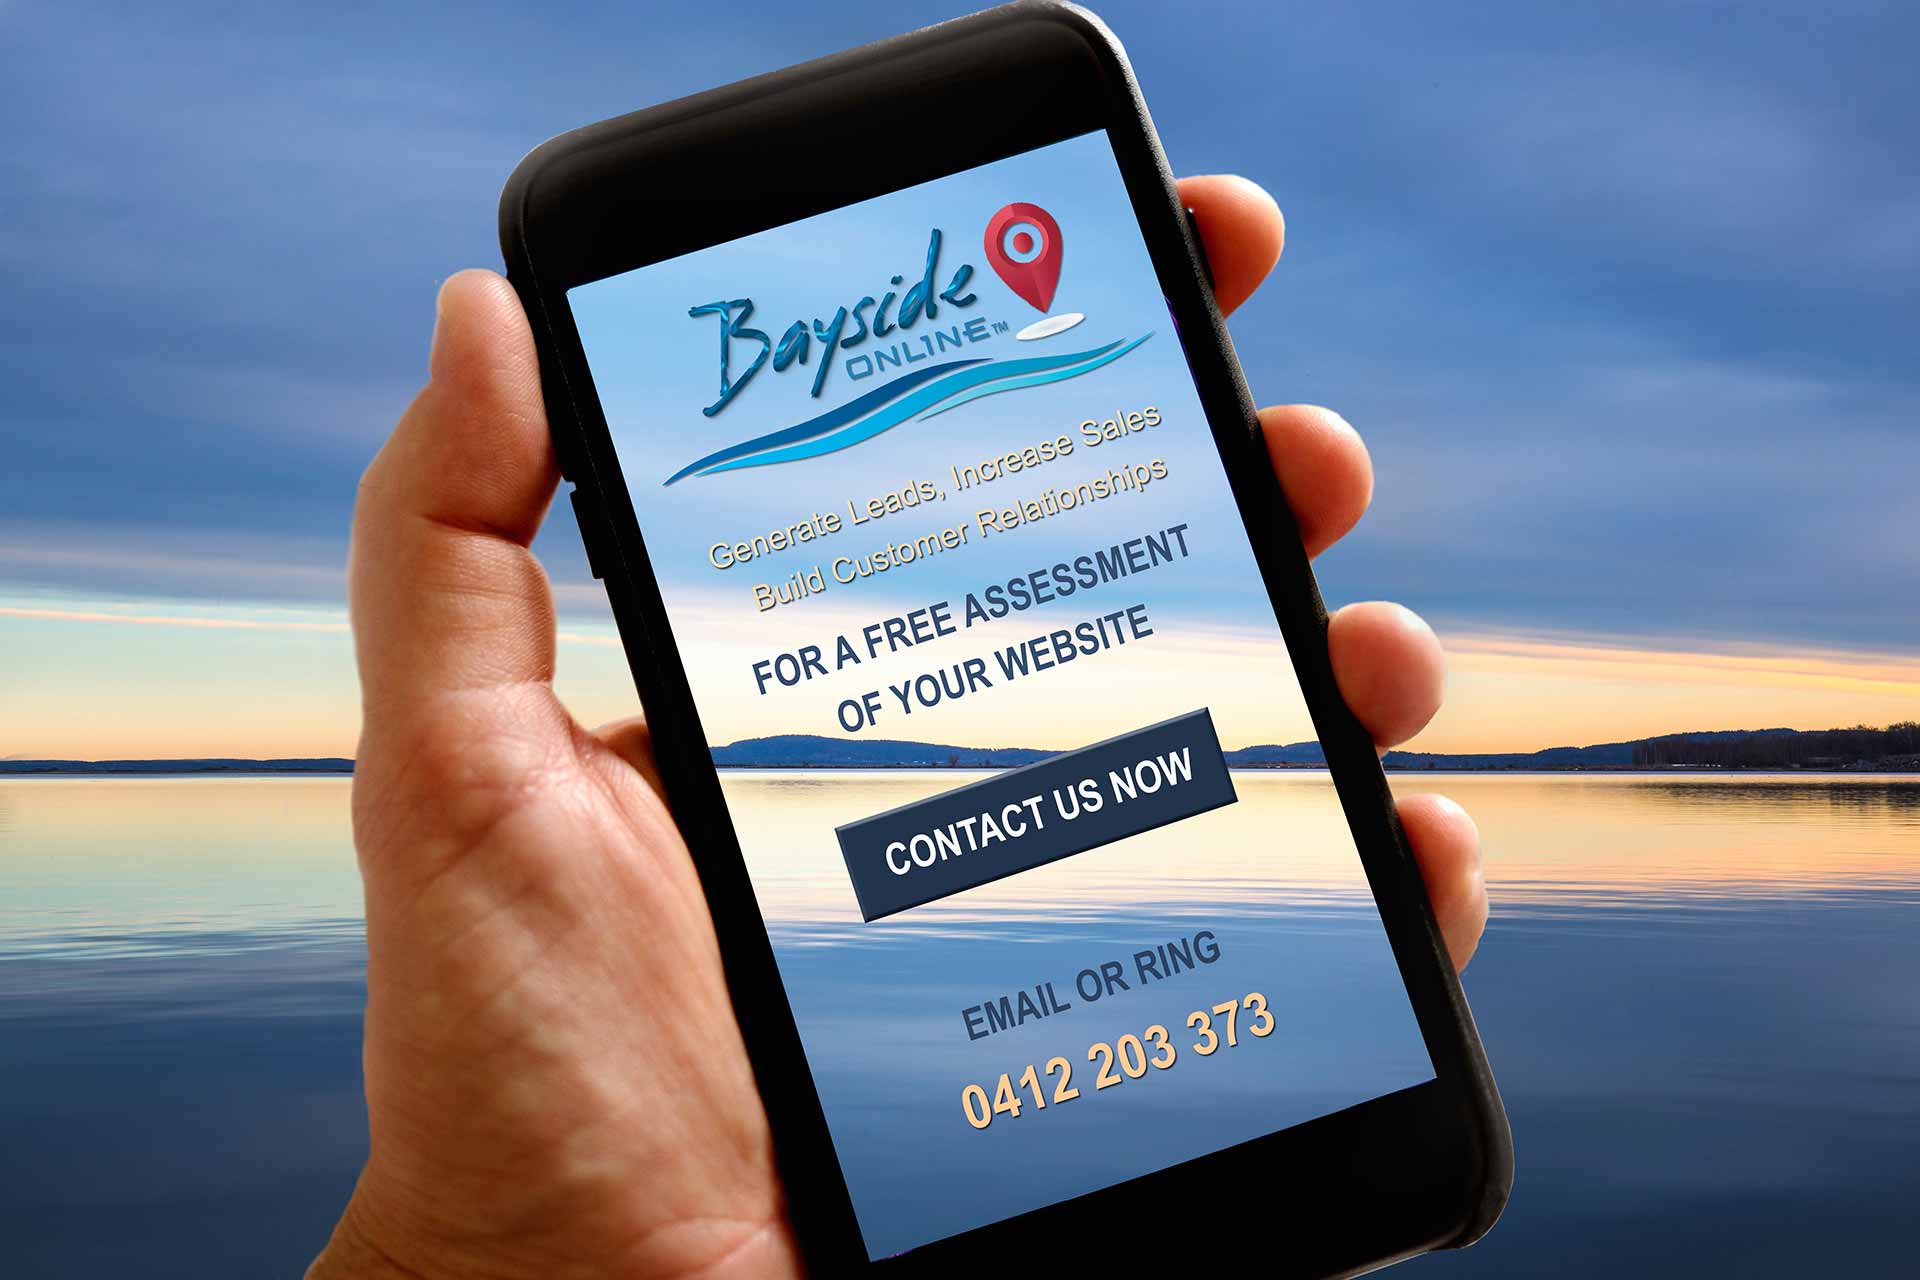 Bayside Online mobile screen display offering a free assessment of your website when you CONTACT US